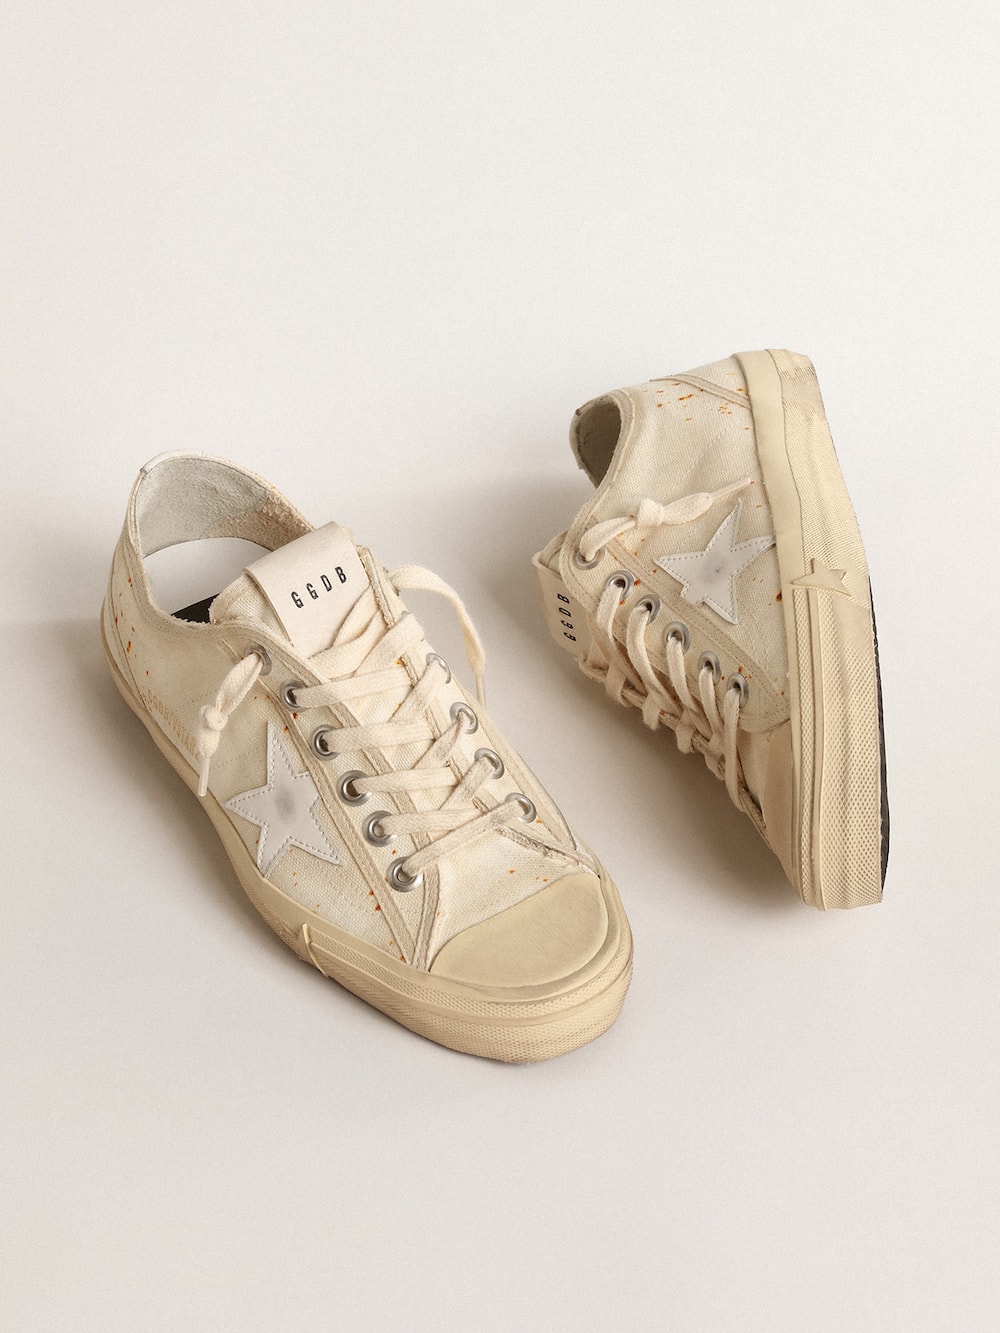 Golden Goose - Women’s V-Star LAB in canvas with leather star and rust-colored speckles in 